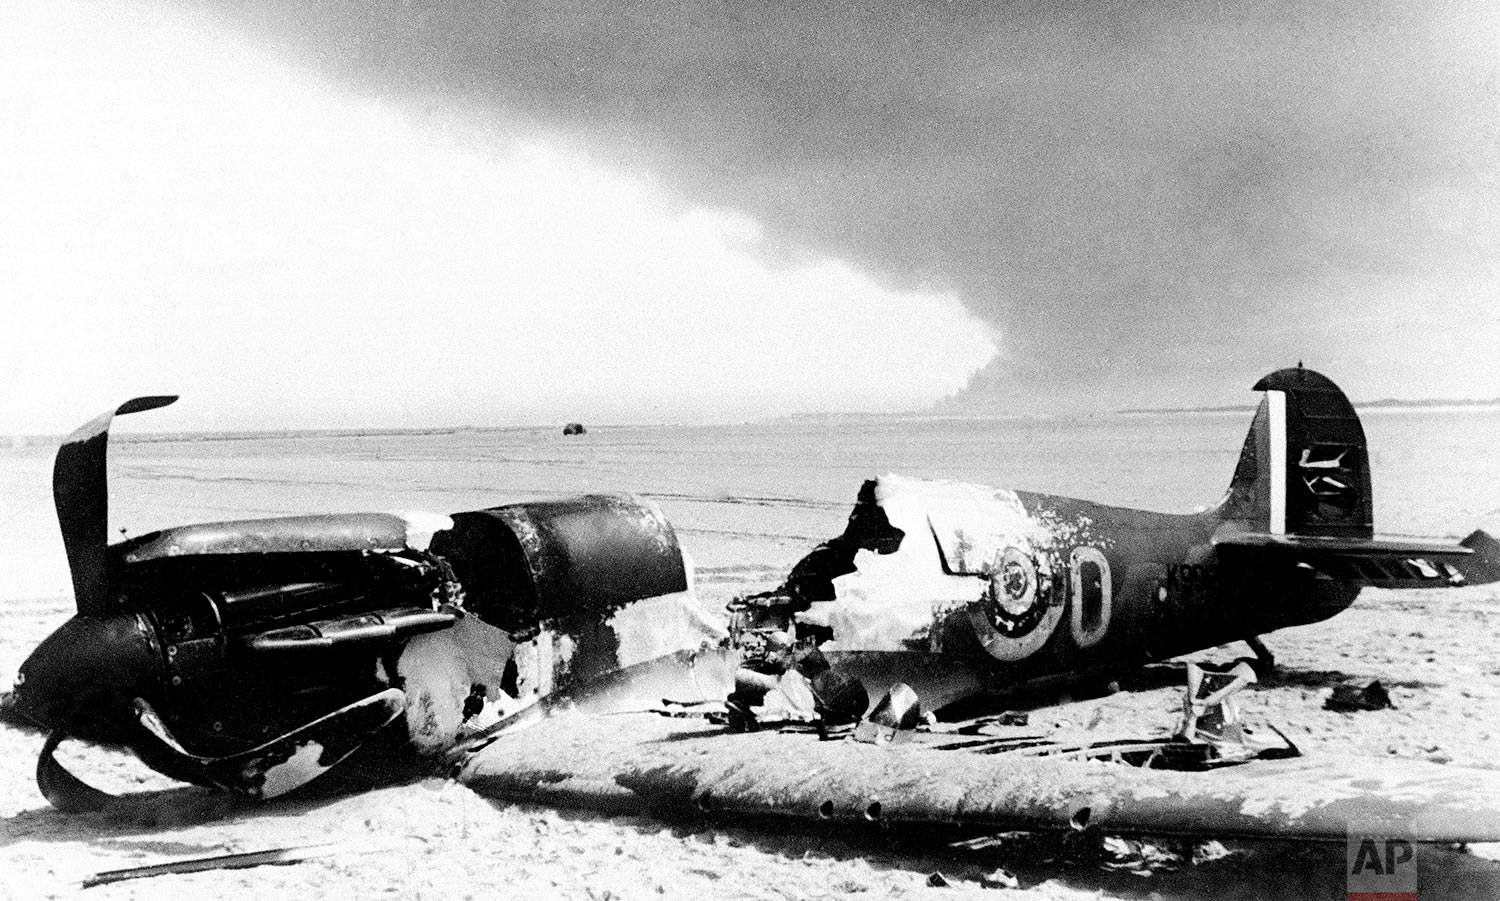  A British Spitfire fighter lays with its cockpit blasted out, after it crashed to the beach at Dunkirk, France on June 6, 1940, the last stand port of the Allied forces which fled from Flanders. Smoke from burning Dunkirk may be seen in the backgrou